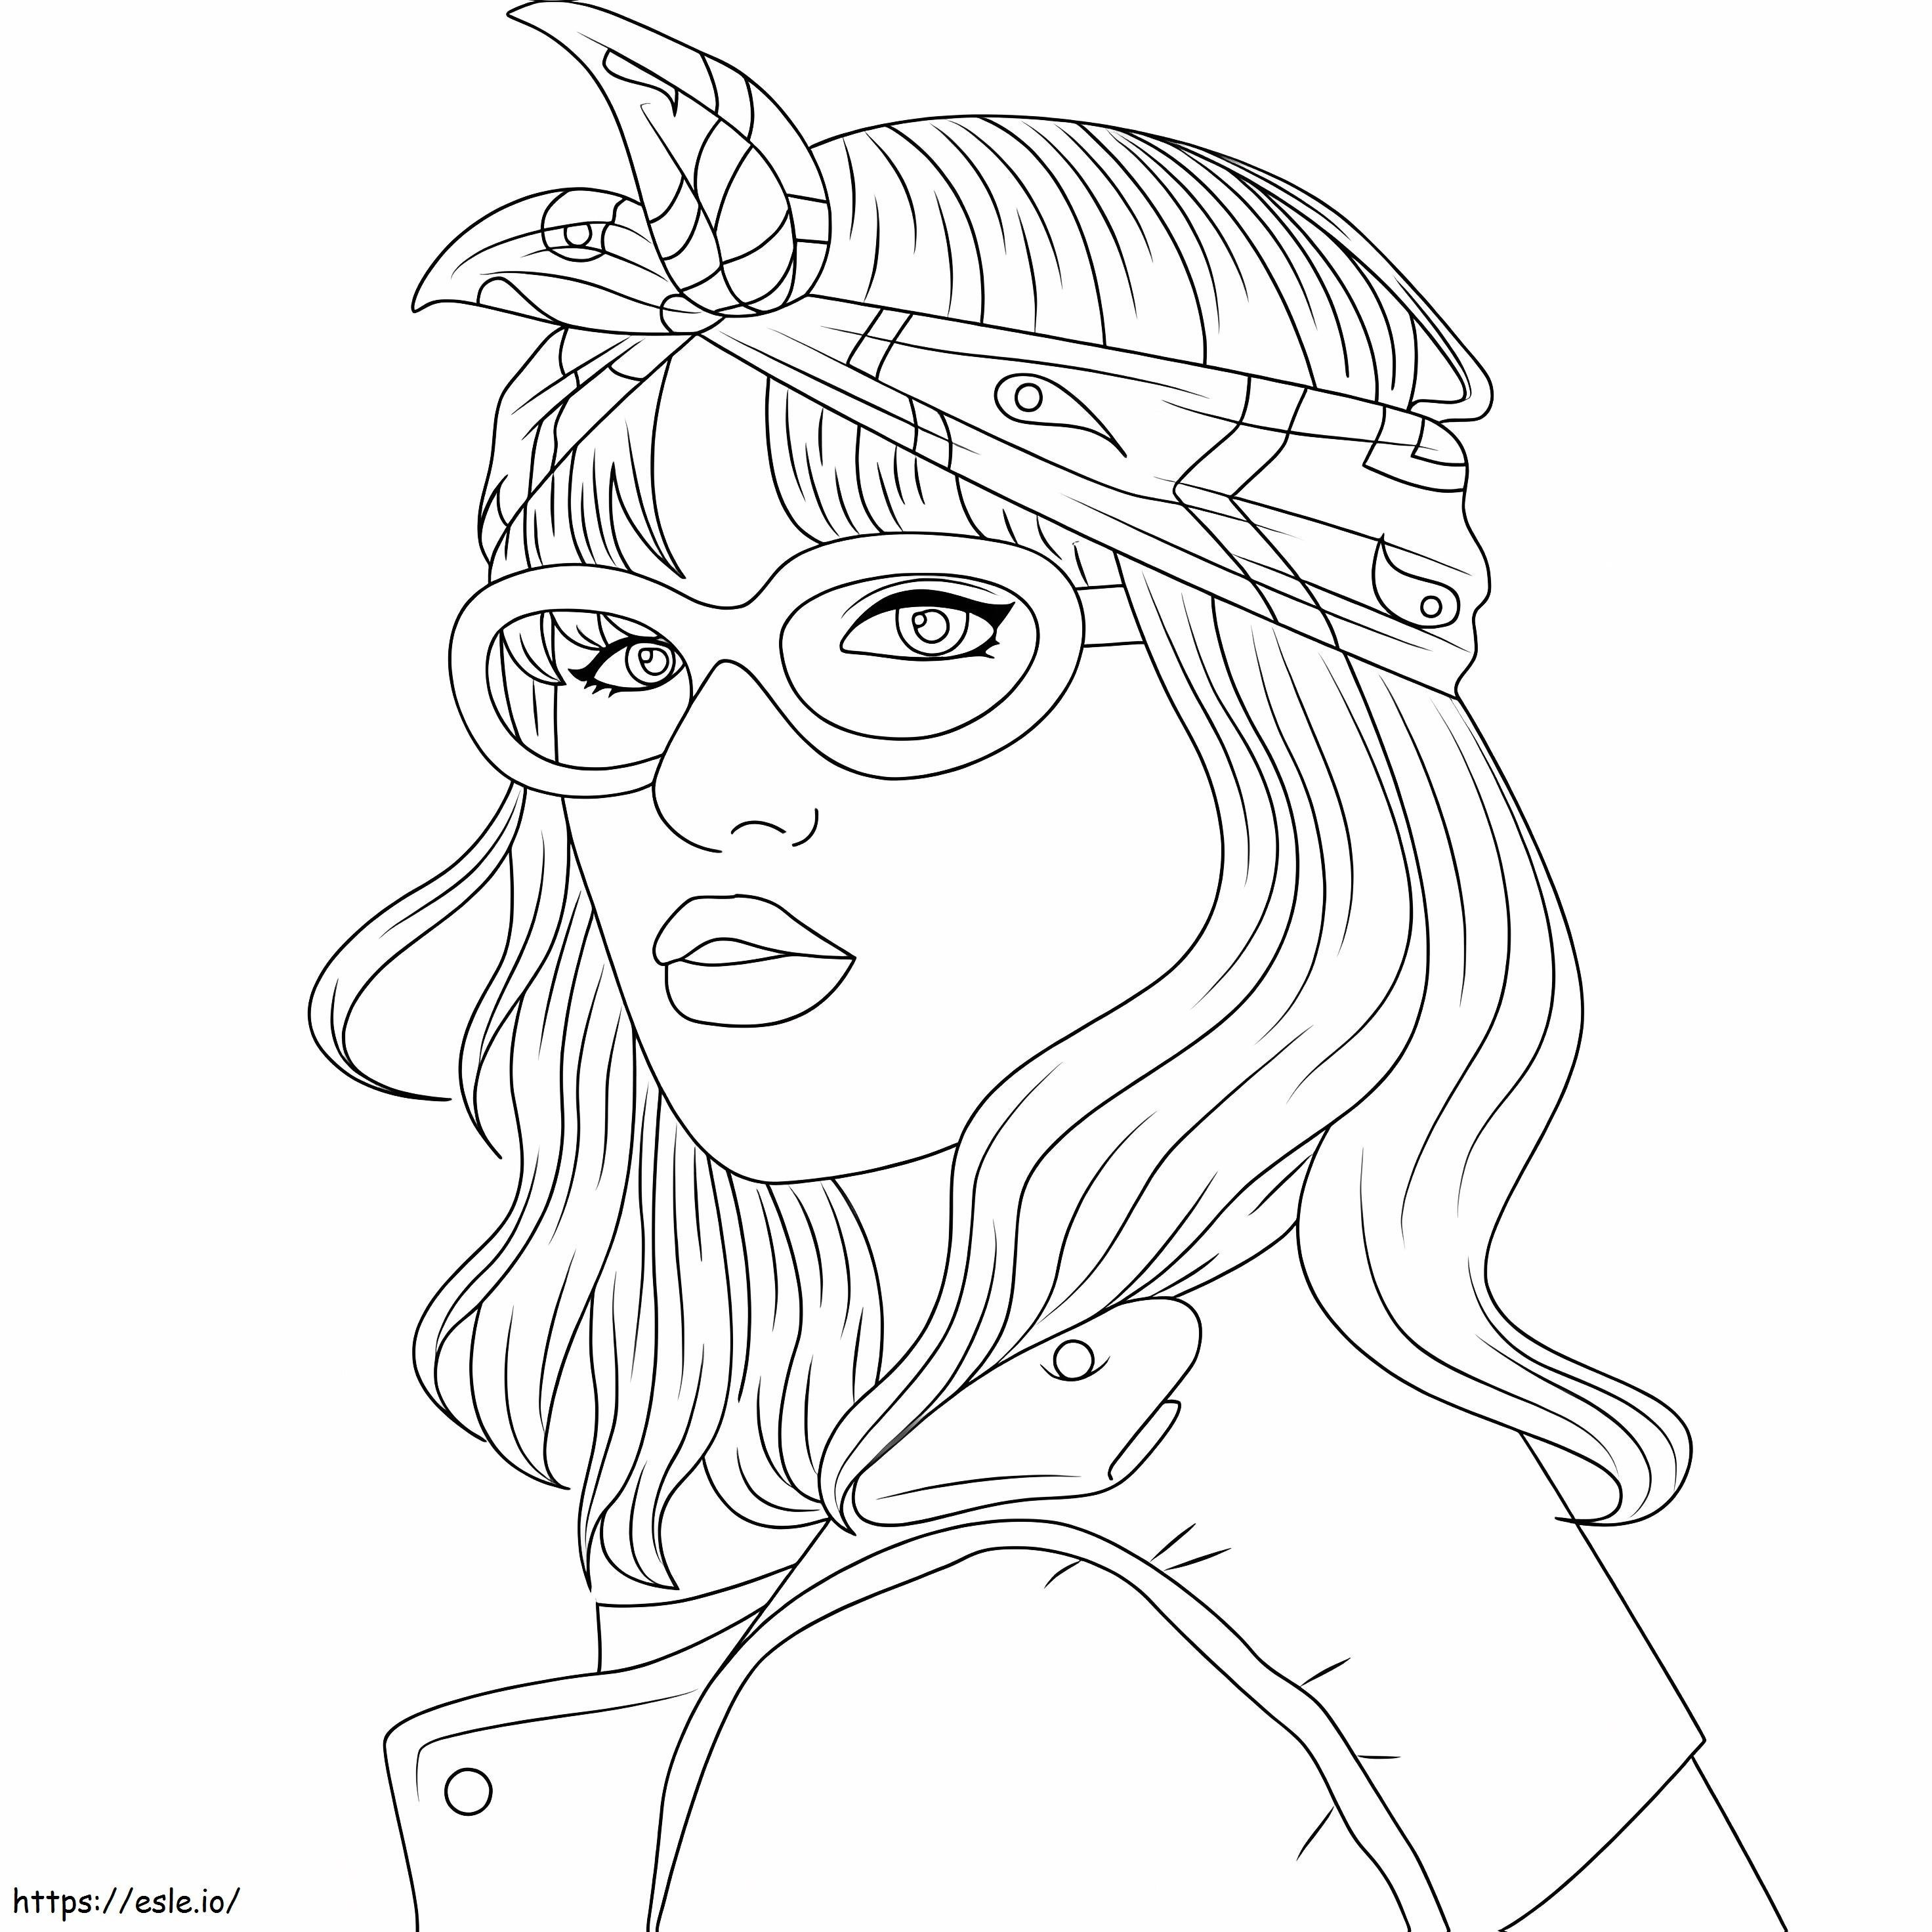 Girl In Glasses coloring page